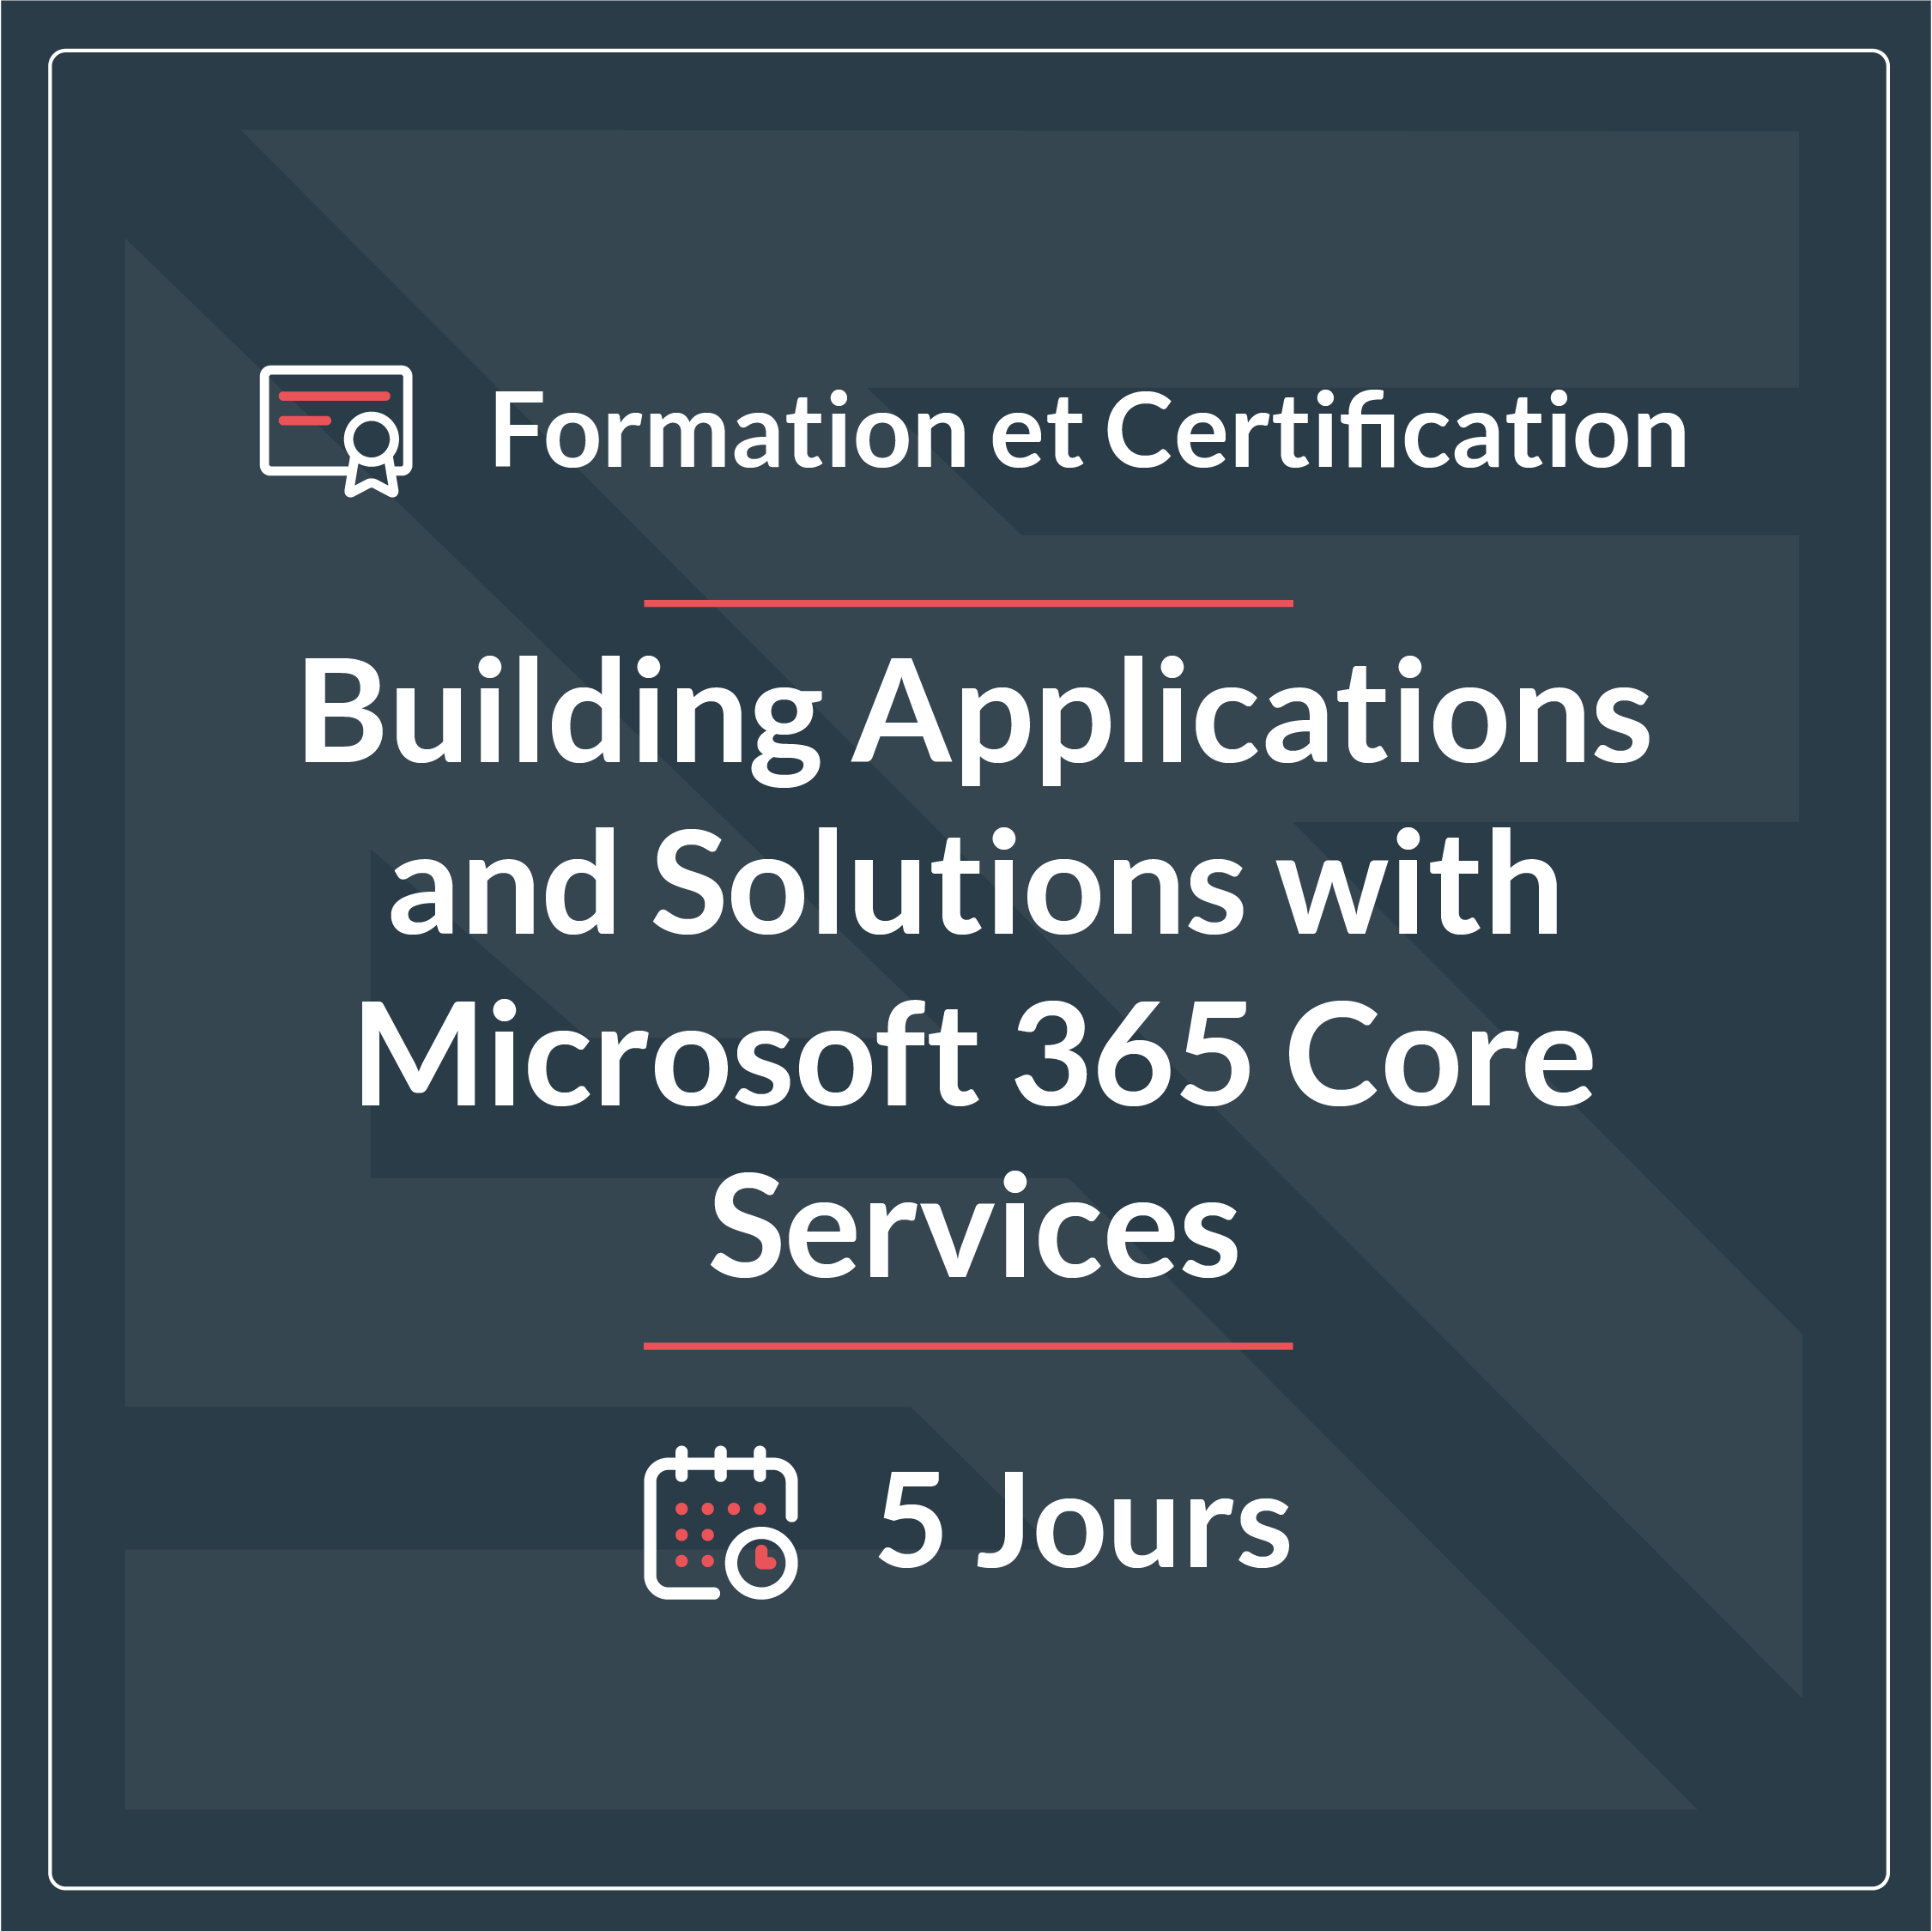 BUILDING APPLICATIONS AND SOLUTIONSWITH MICROSOFT 365 CORE SERVICES